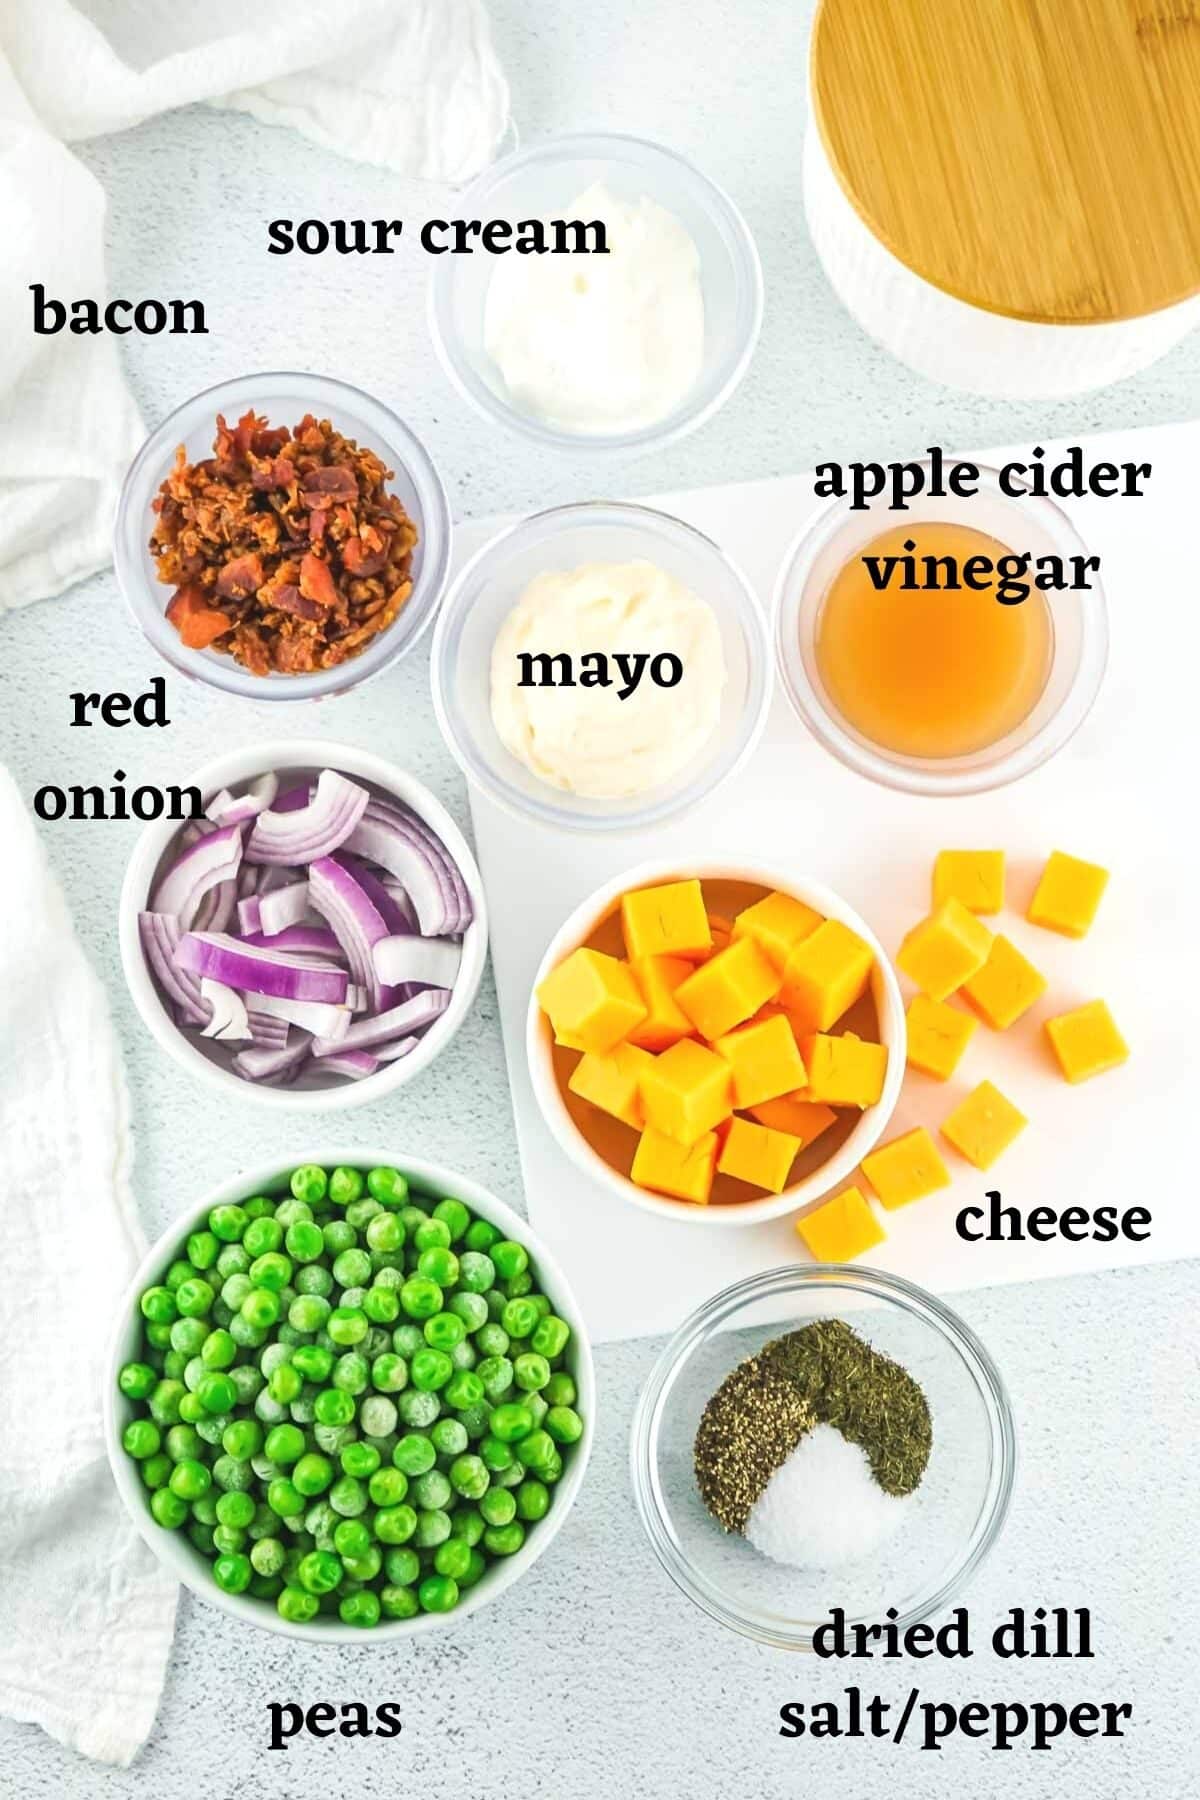 Ingredients needed to make classic old fashioned pea salad.